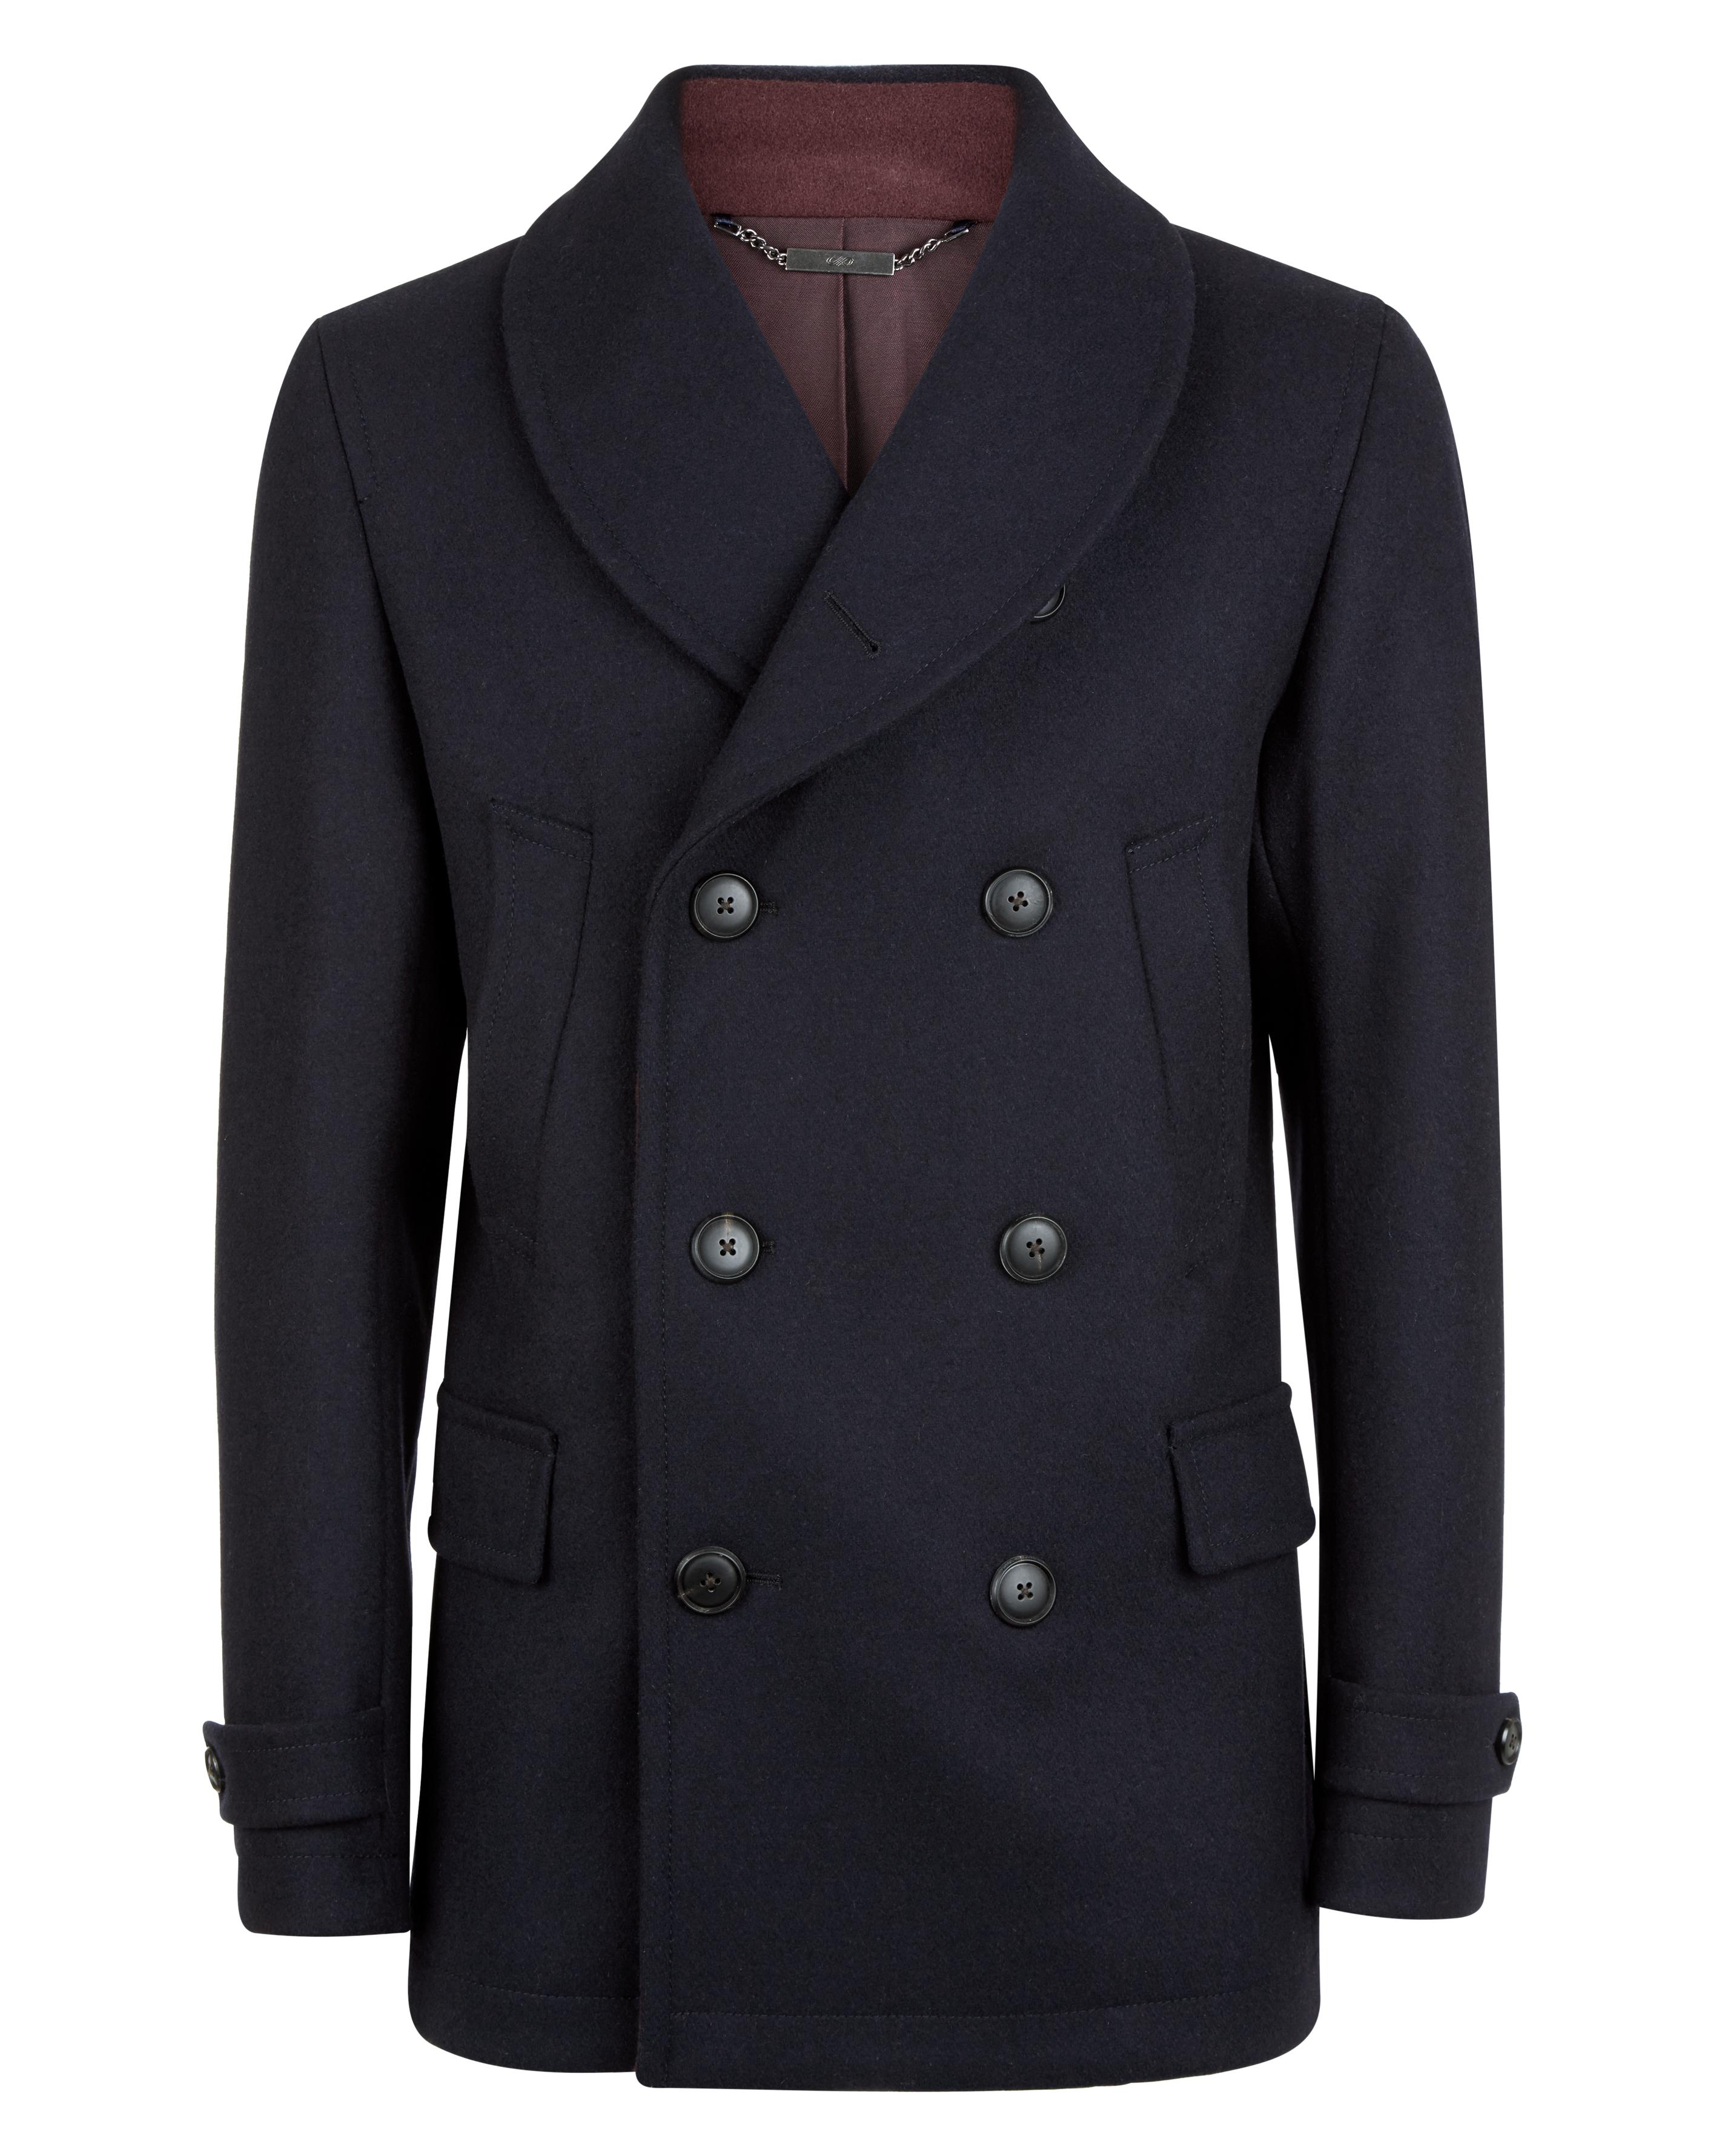 Lyst - Jaeger Wool Shawl Collar Peacoat in Blue for Men